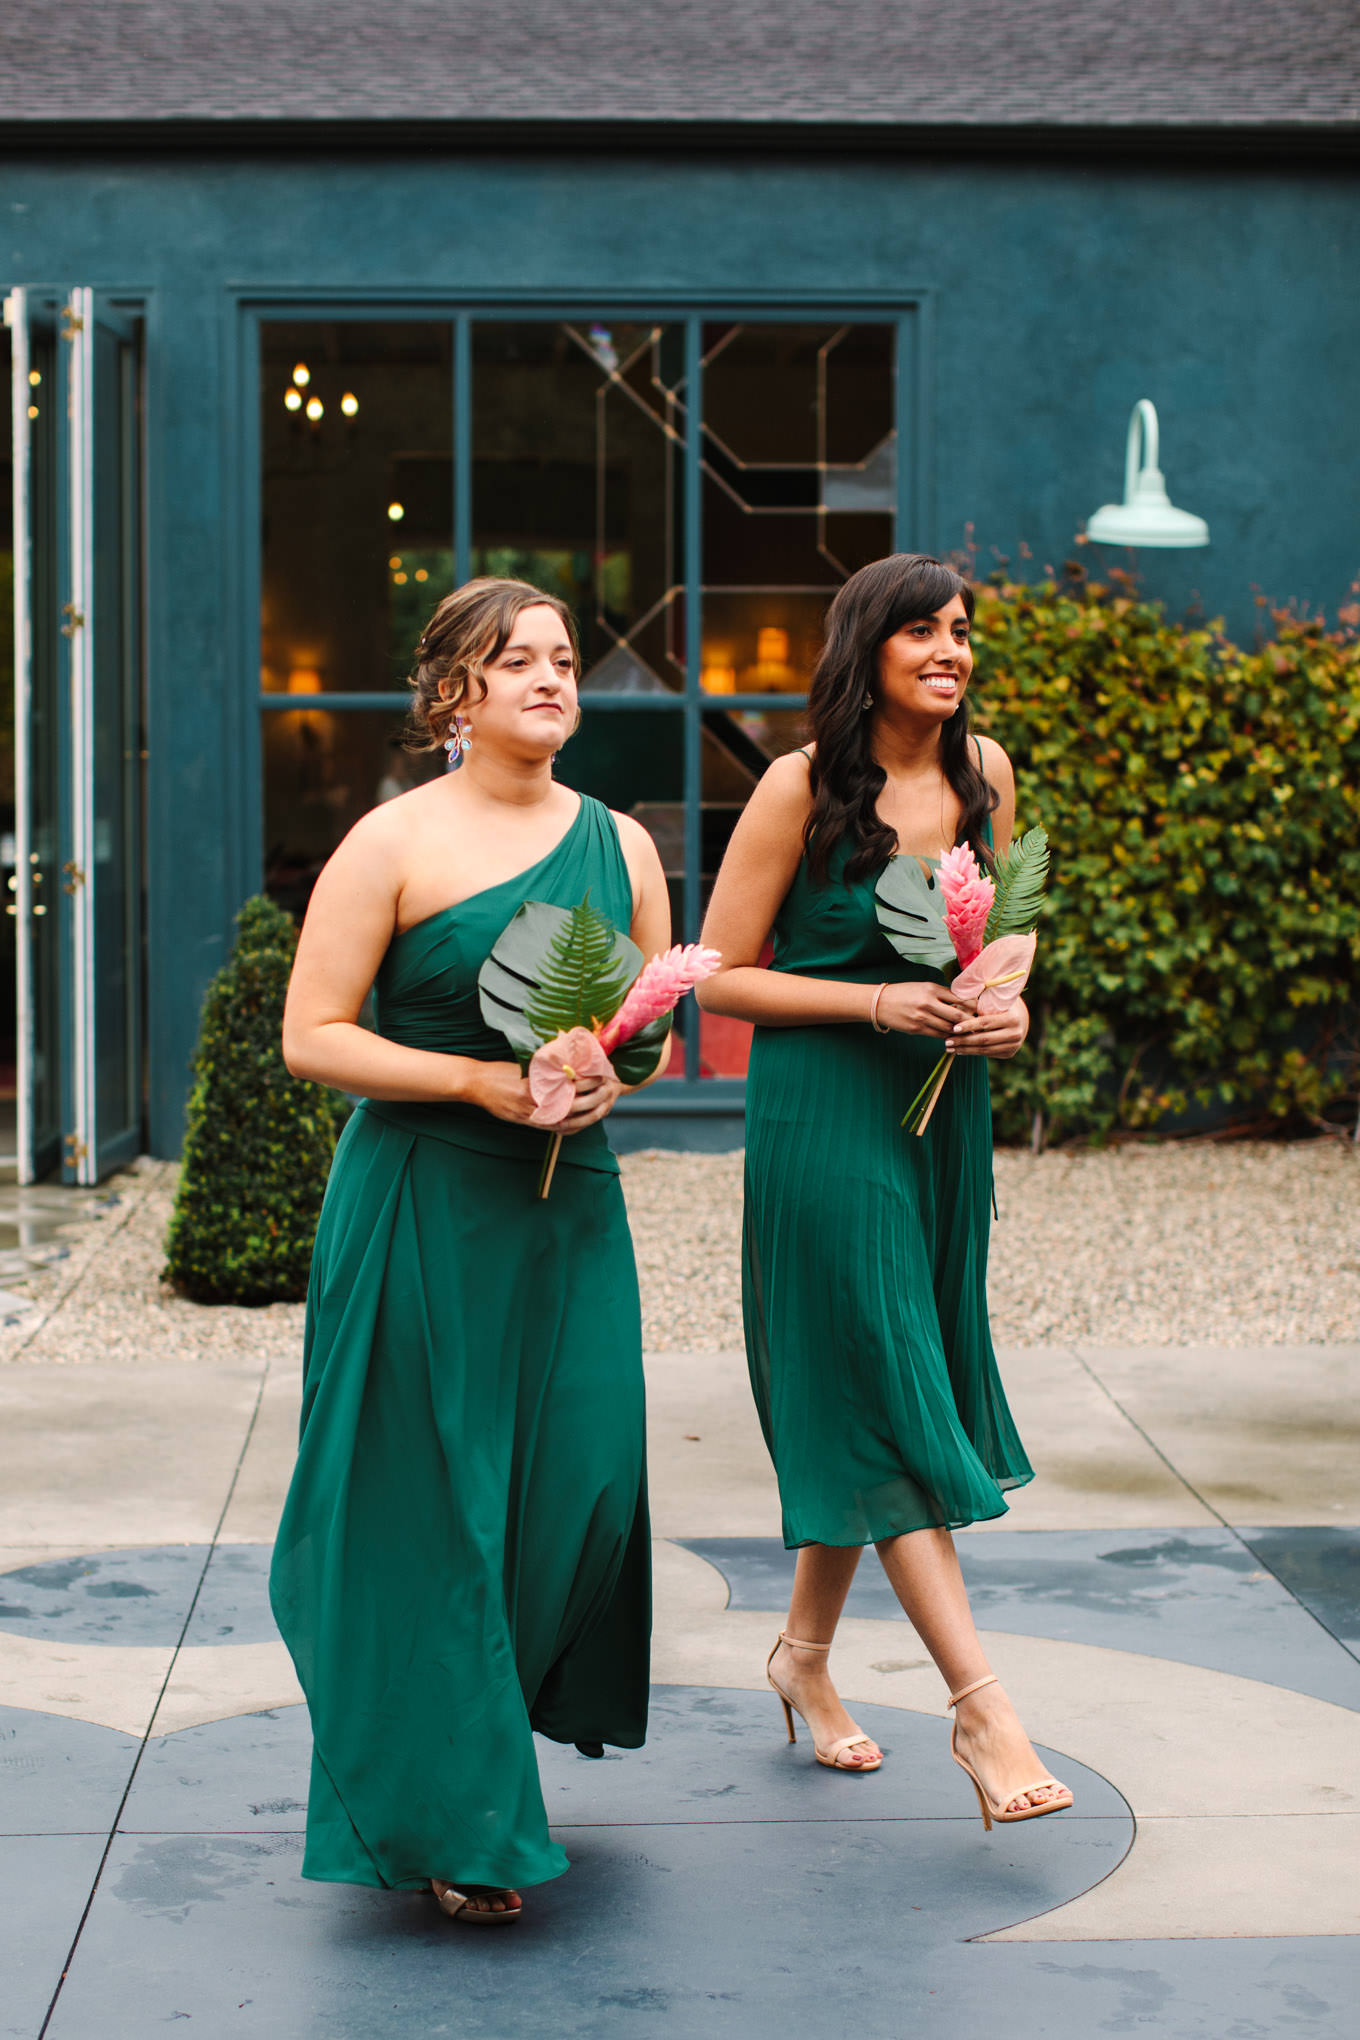 Bridesmaids in green | TV inspired wedding at The Fig House Los Angeles | Published on The Knot | Fresh and colorful photography for fun-loving couples in Southern California | #losangeleswedding #TVwedding #colorfulwedding #theknot   Source: Mary Costa Photography | Los Angeles wedding photographer